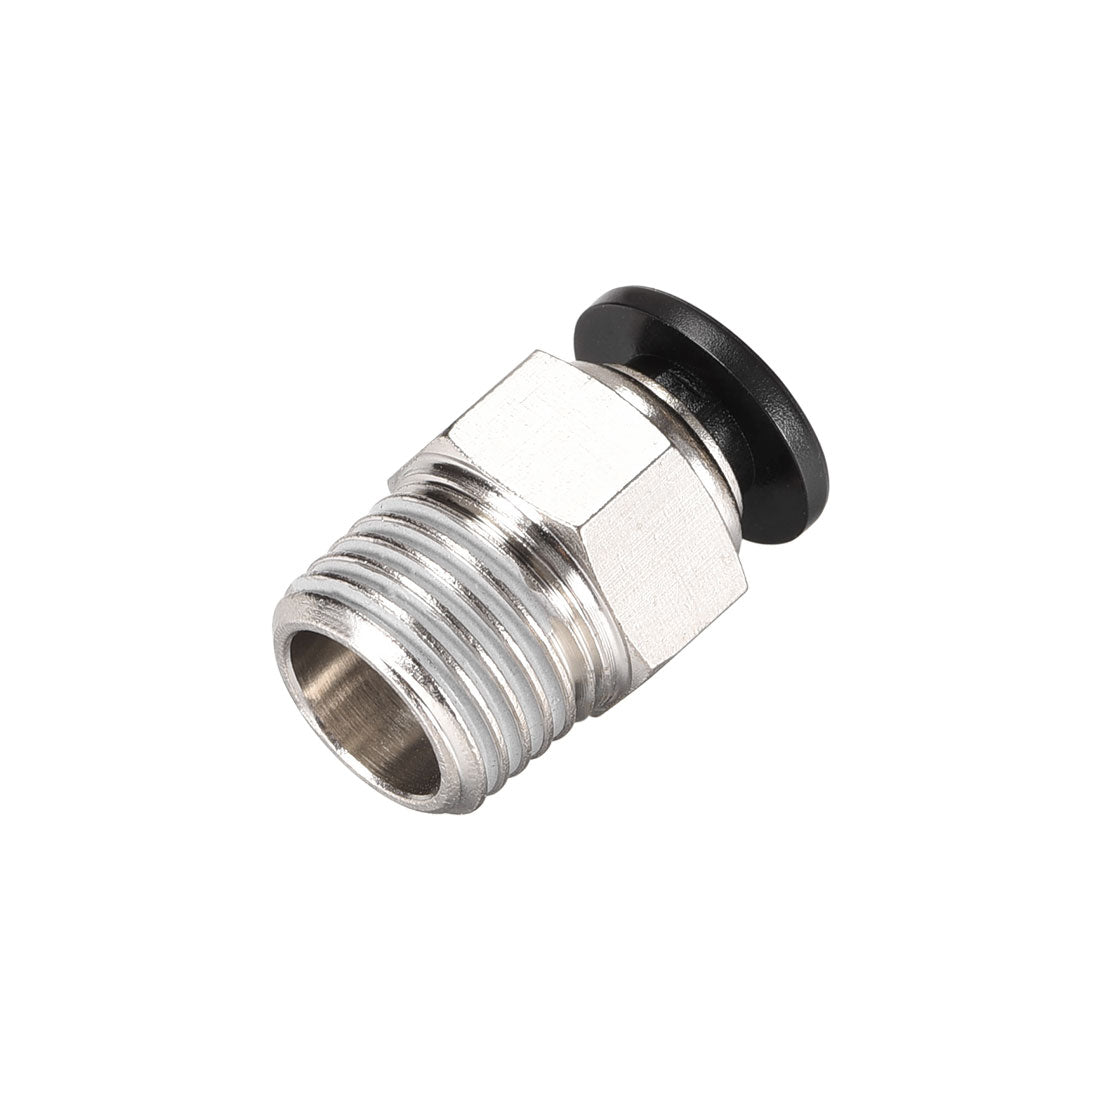 uxcell Uxcell Straight Pneumatic Push to Quick Connect Fittings 1/4NPT Male x 6mm Tube OD Silver Tone